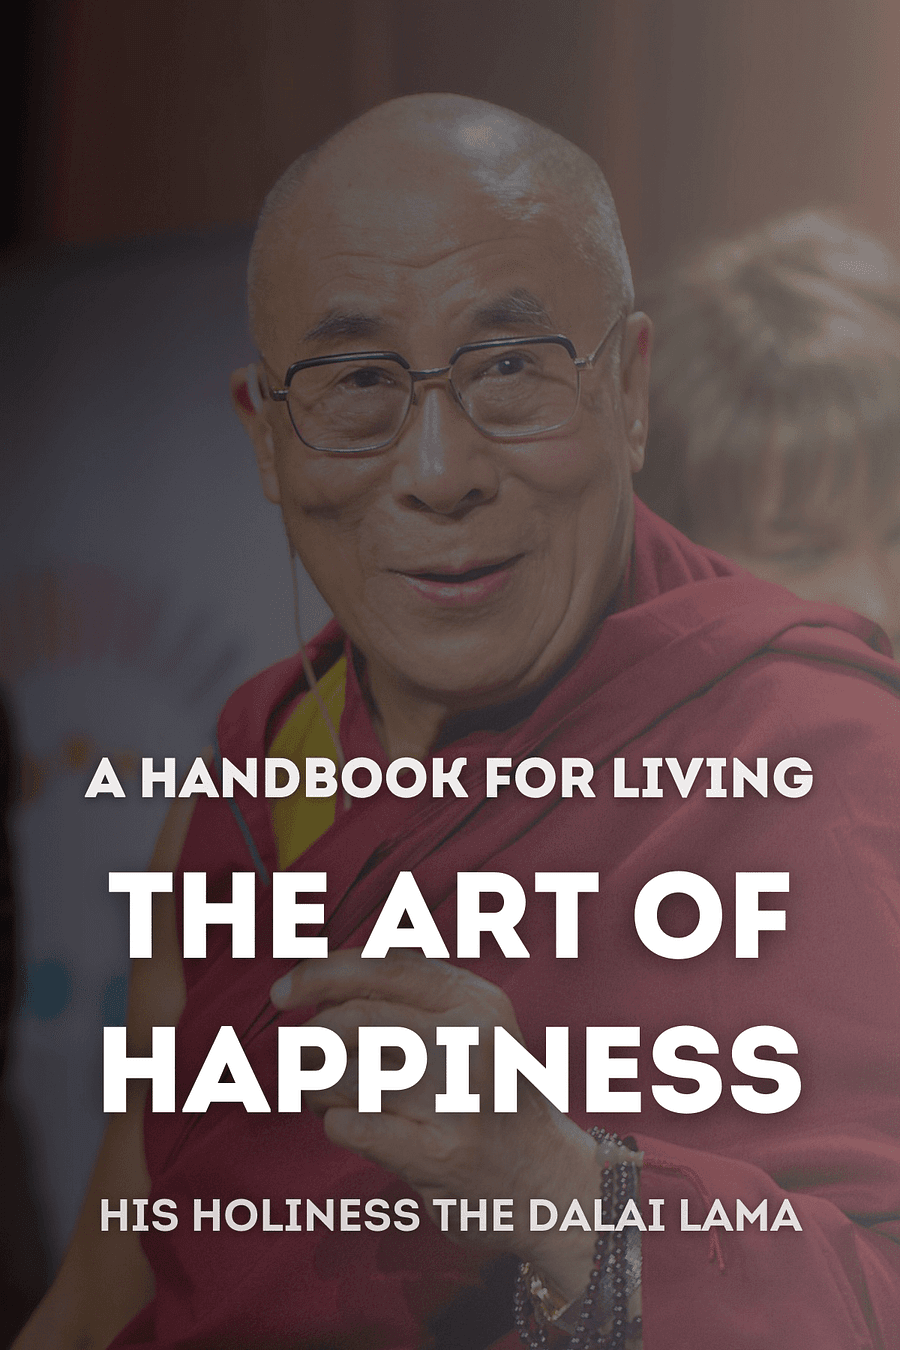 The Art of Happiness, 10th Anniversary Edition by Dalai Lama - Book Summary